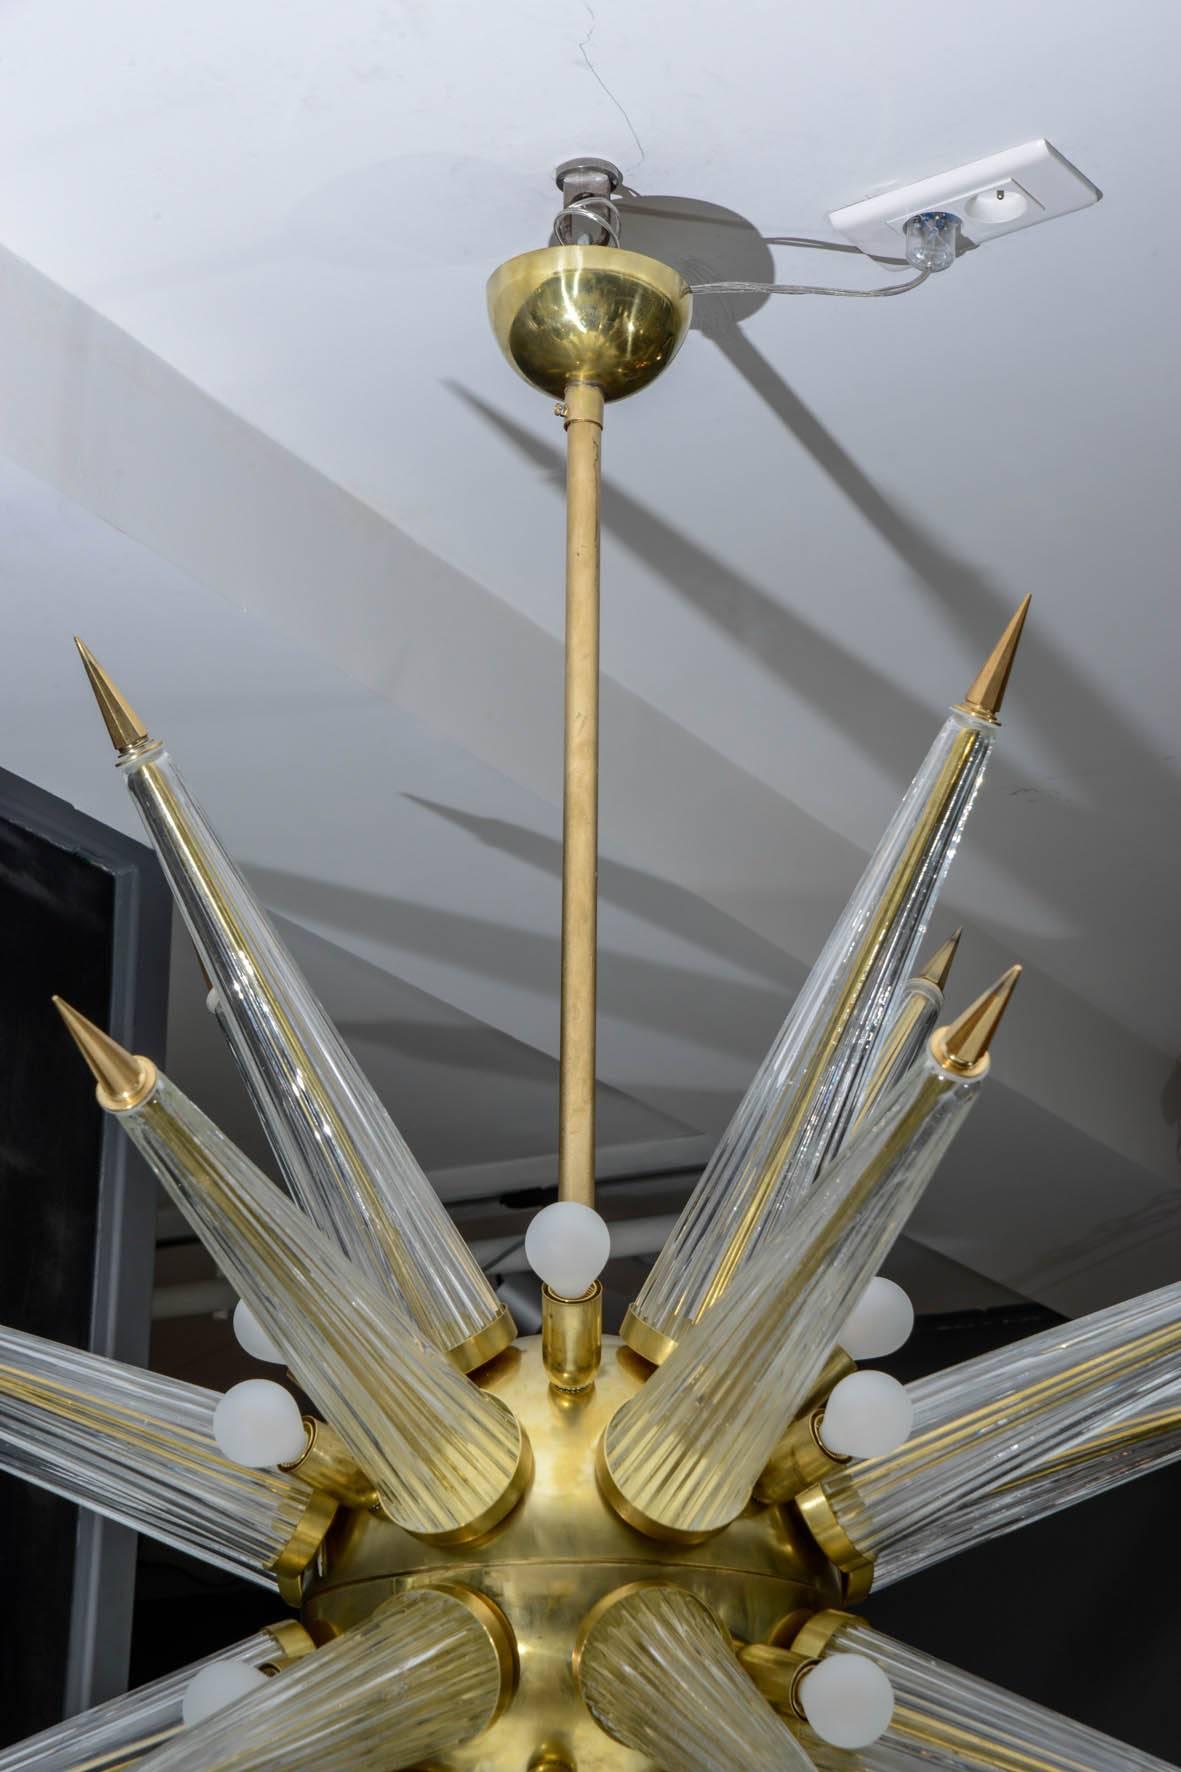 Big Sputnik style chandelier with a brass structure and Murano glass spikes with brass details at the points.